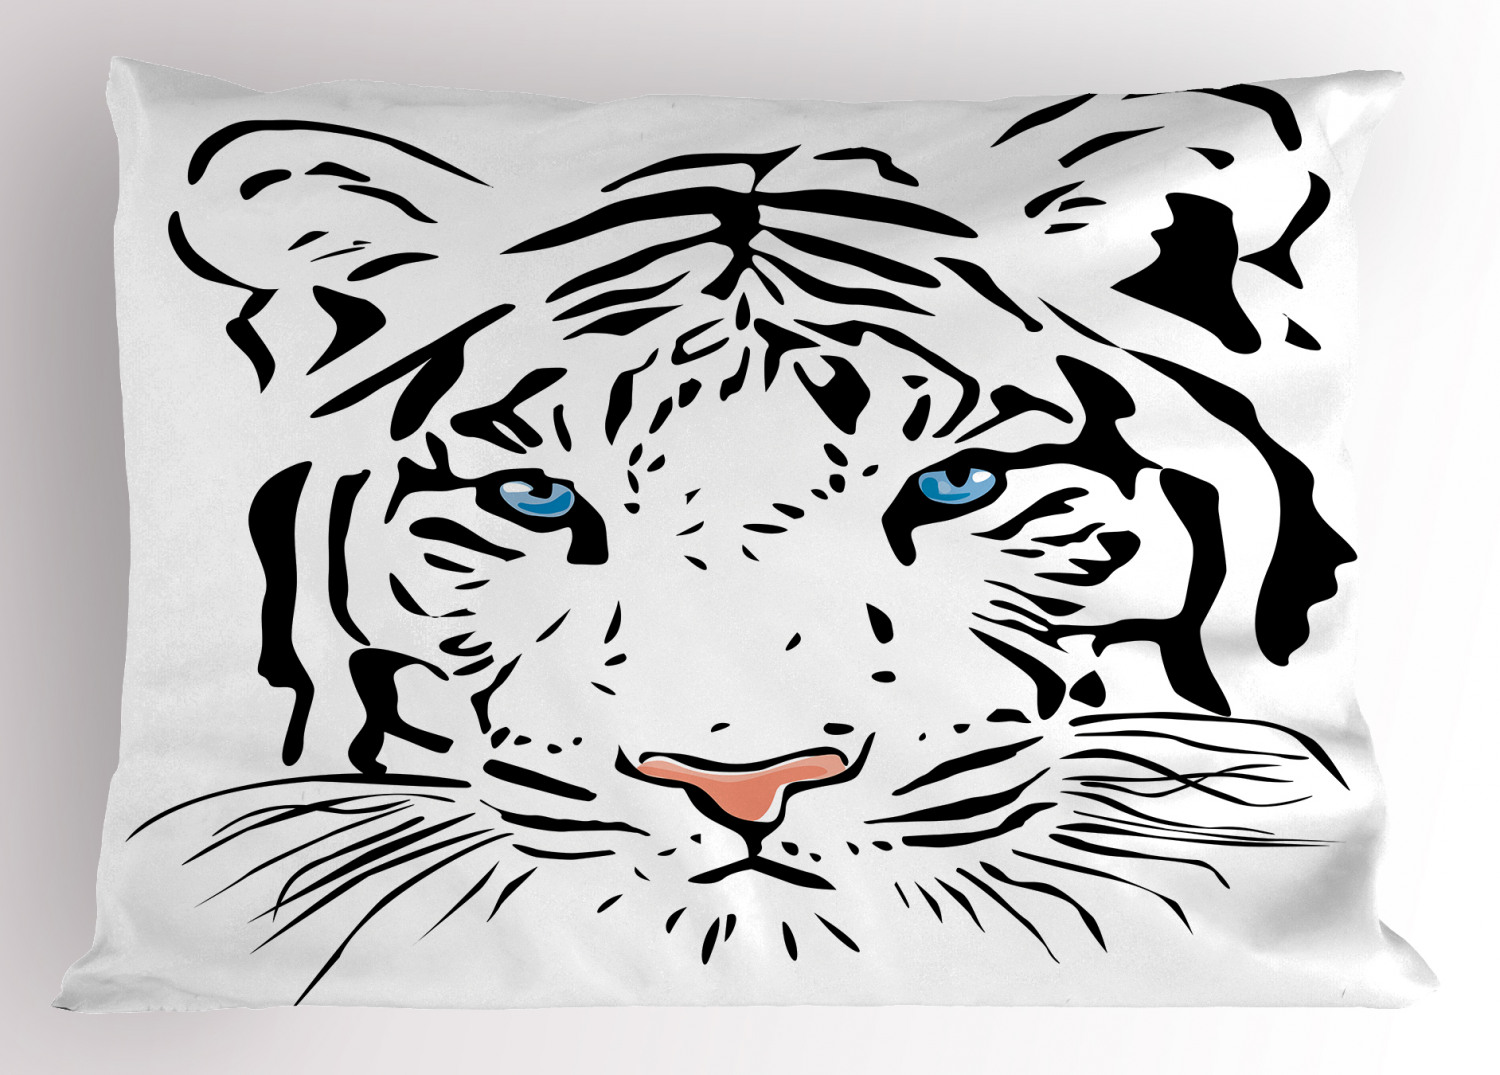 Details about   Tattoo Pillow Sham Decorative Pillowcase 3 Sizes Available for Bedroom Decor 